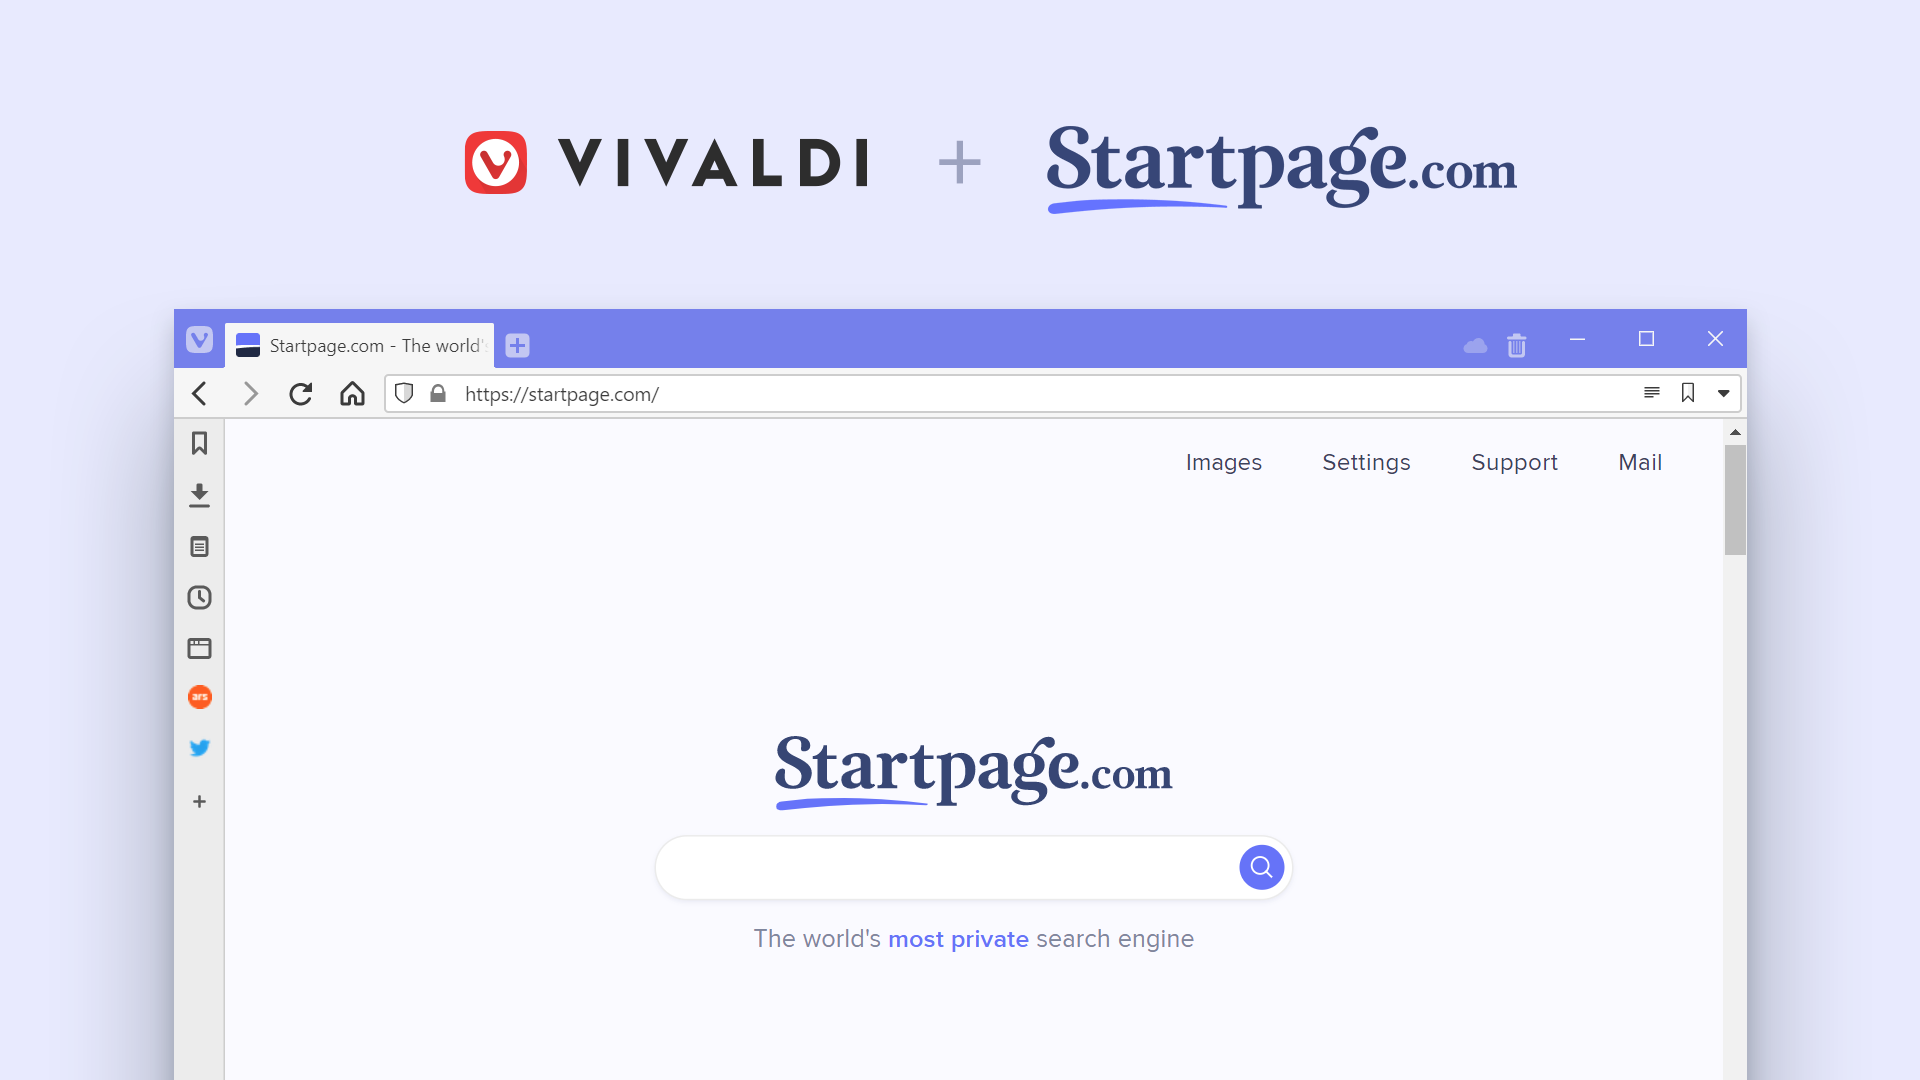 Startpage and Vivaldi bring more privacy to your search